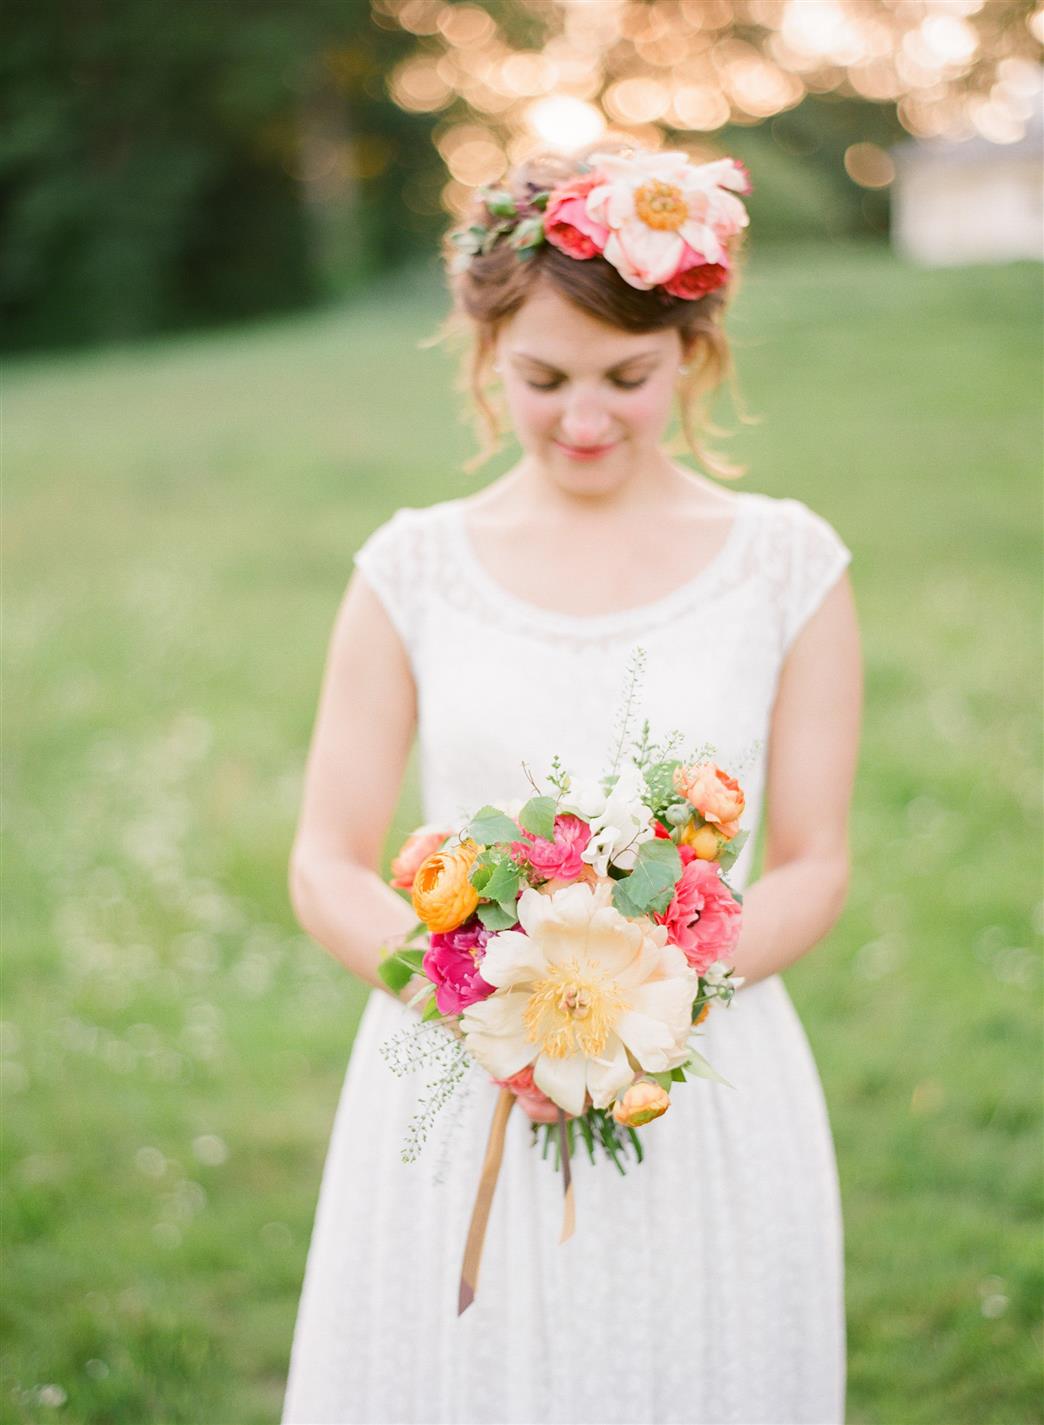 Bouquet - A 1940s Wedding Dress for a Sweet Early Summer Wedding from Taylor & Porter Photography